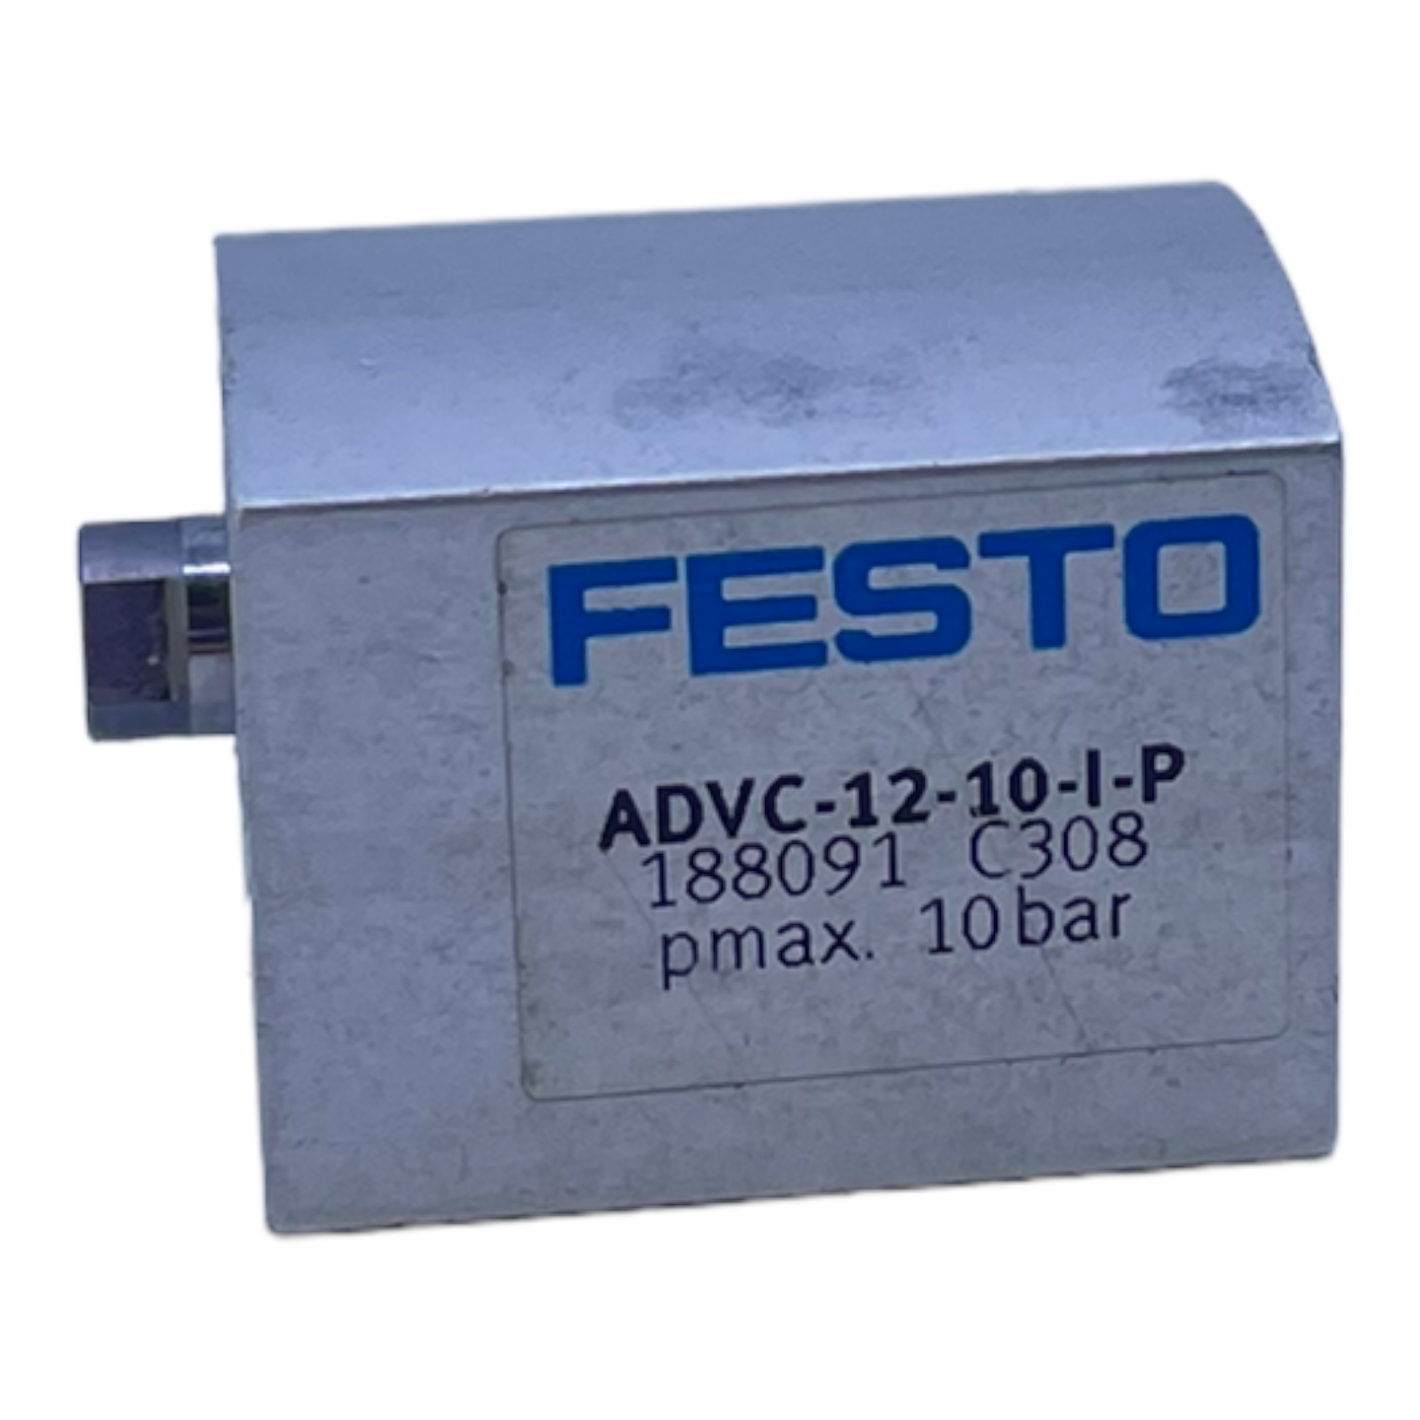 Festo ADVC-12-10-IP short stroke cylinder 188091 1 to 10 bar double acting 188091